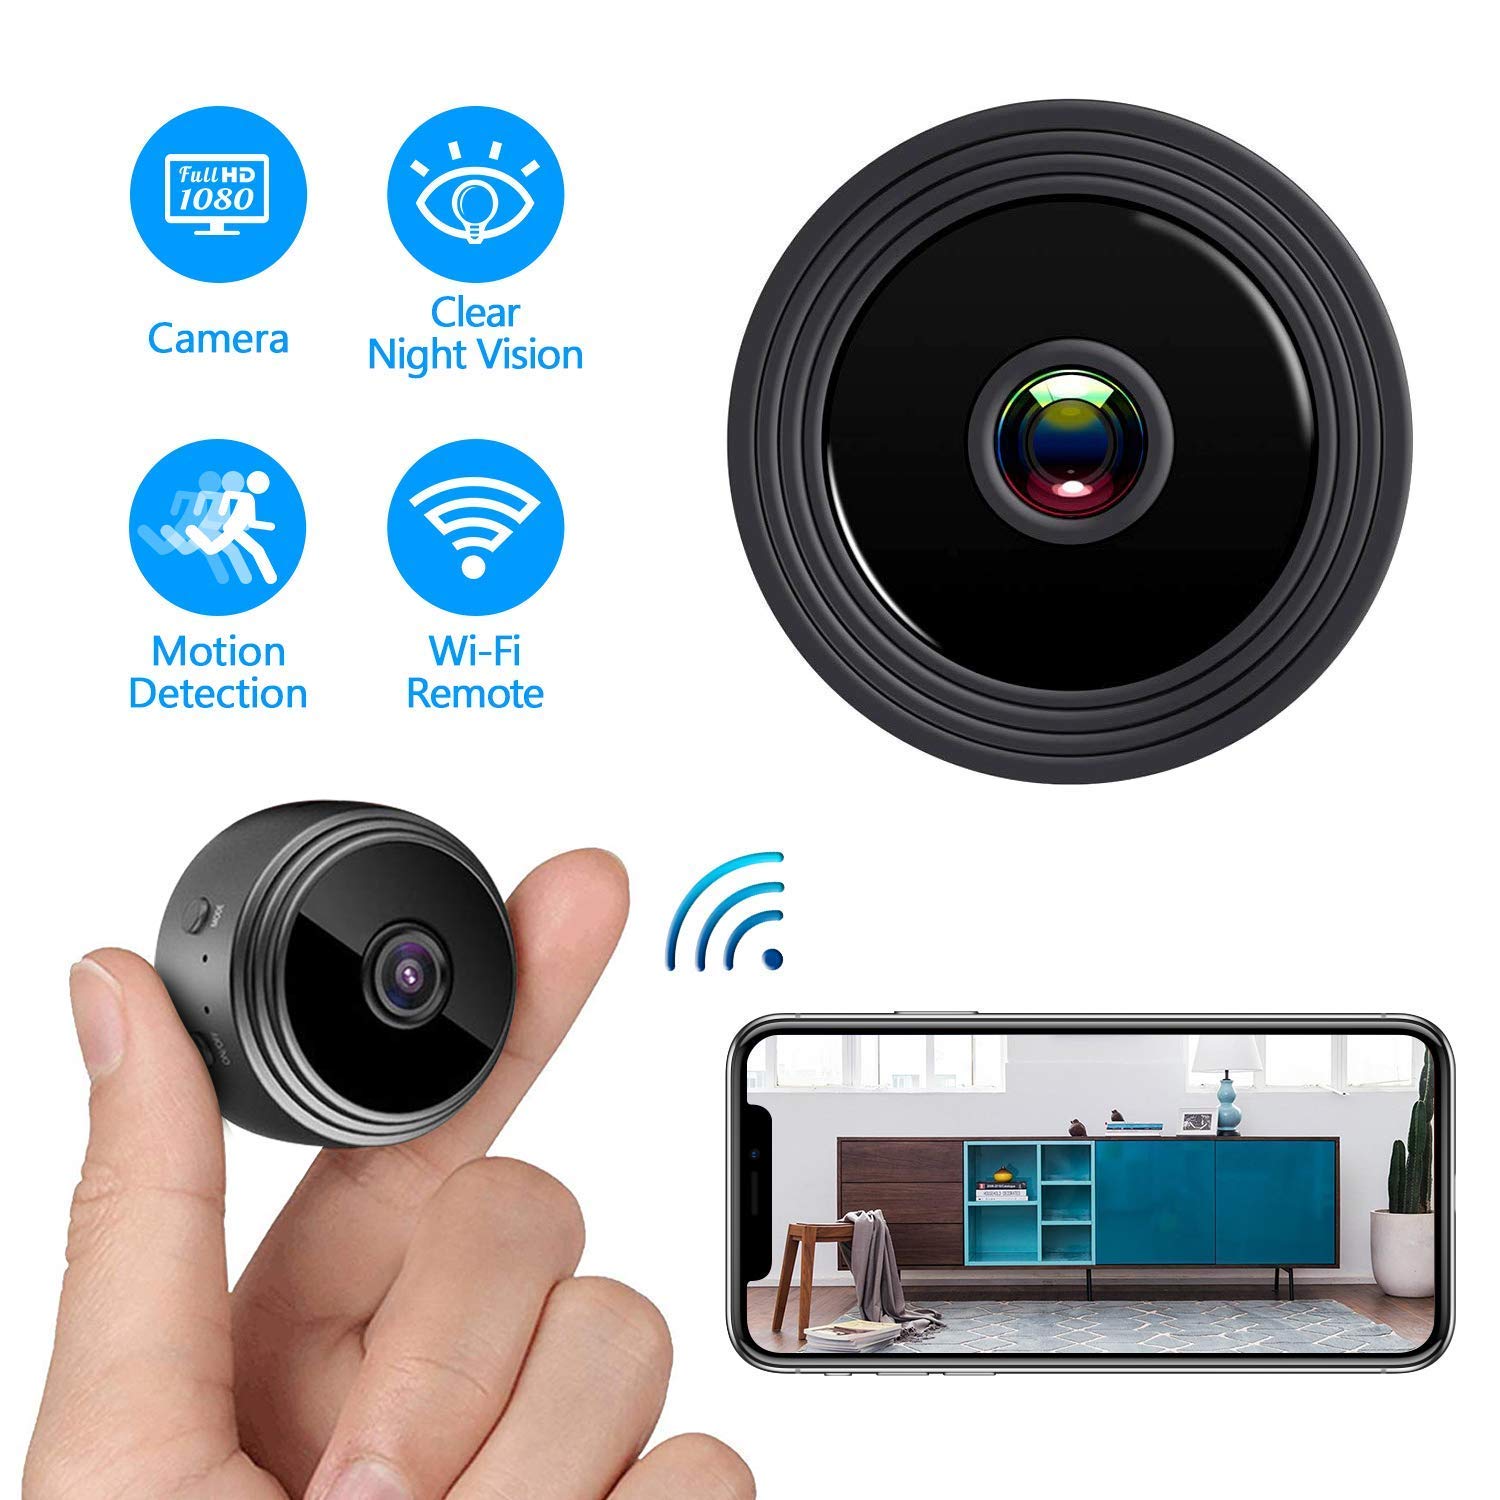 NuCam Yieye WiFi Photo Frame Hidden Spy Camera for Home/Office Security & Pet/Kid Surveillance w Bonus 64GB SD Card Included 365 Days Battery Life Night Vision & Instant Alerts 1080P HD